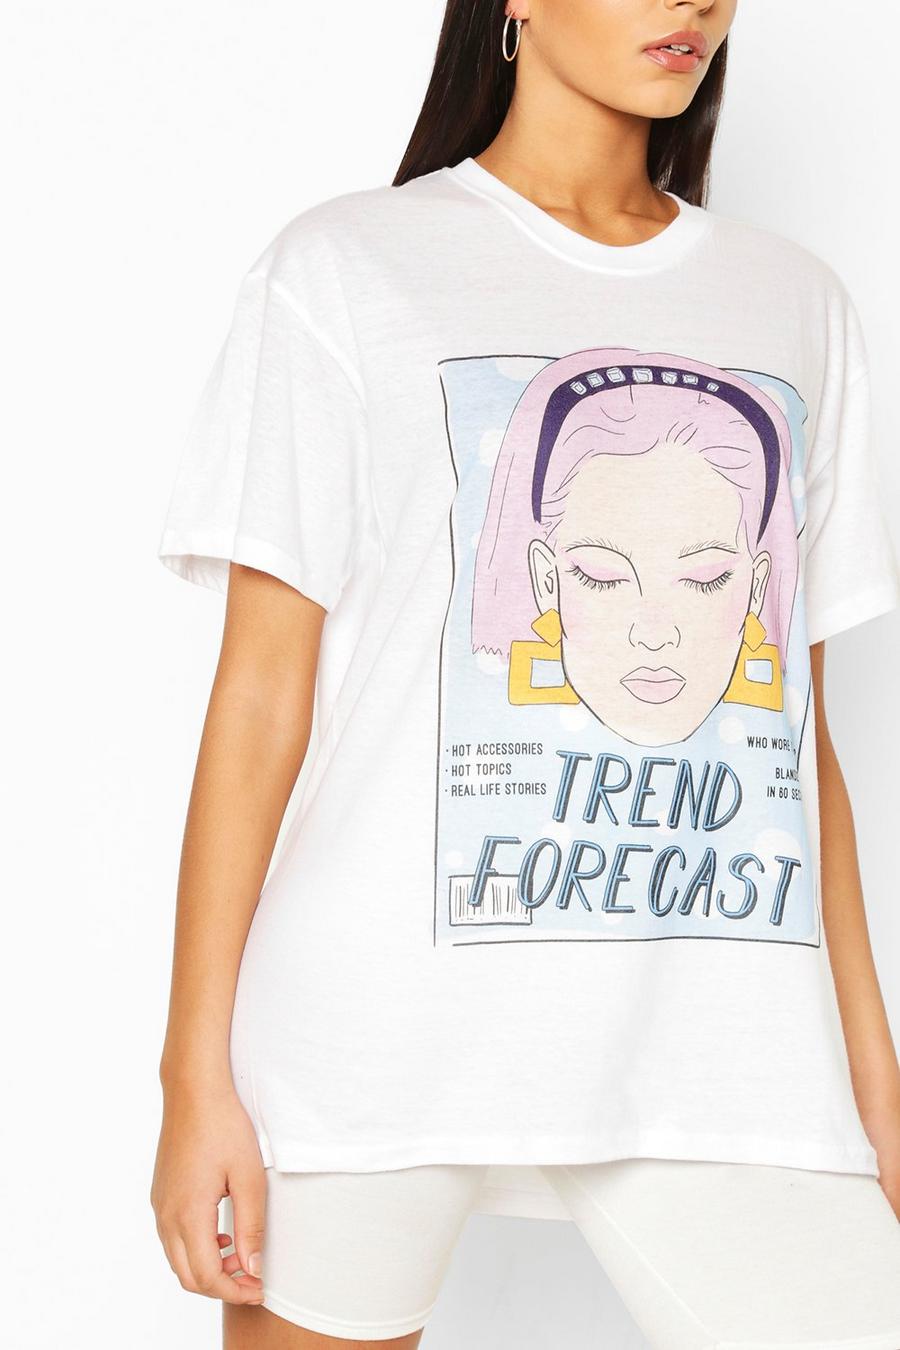 Tall T-shirt “Trend Forecast” image number 1